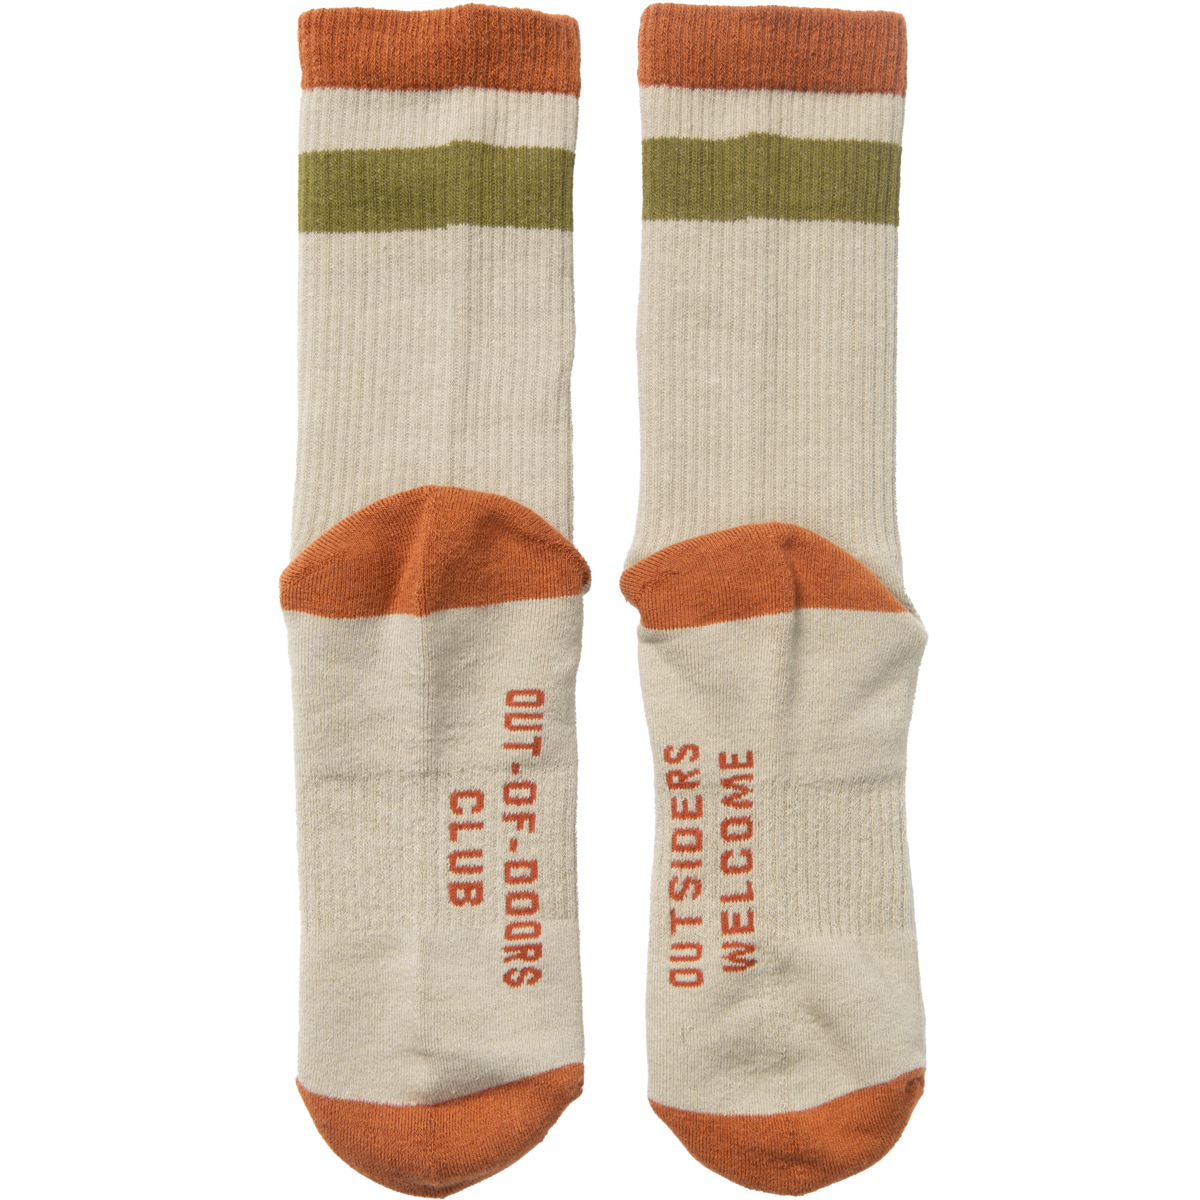 Out-of-Doors Club Sock: L/XL / Antler